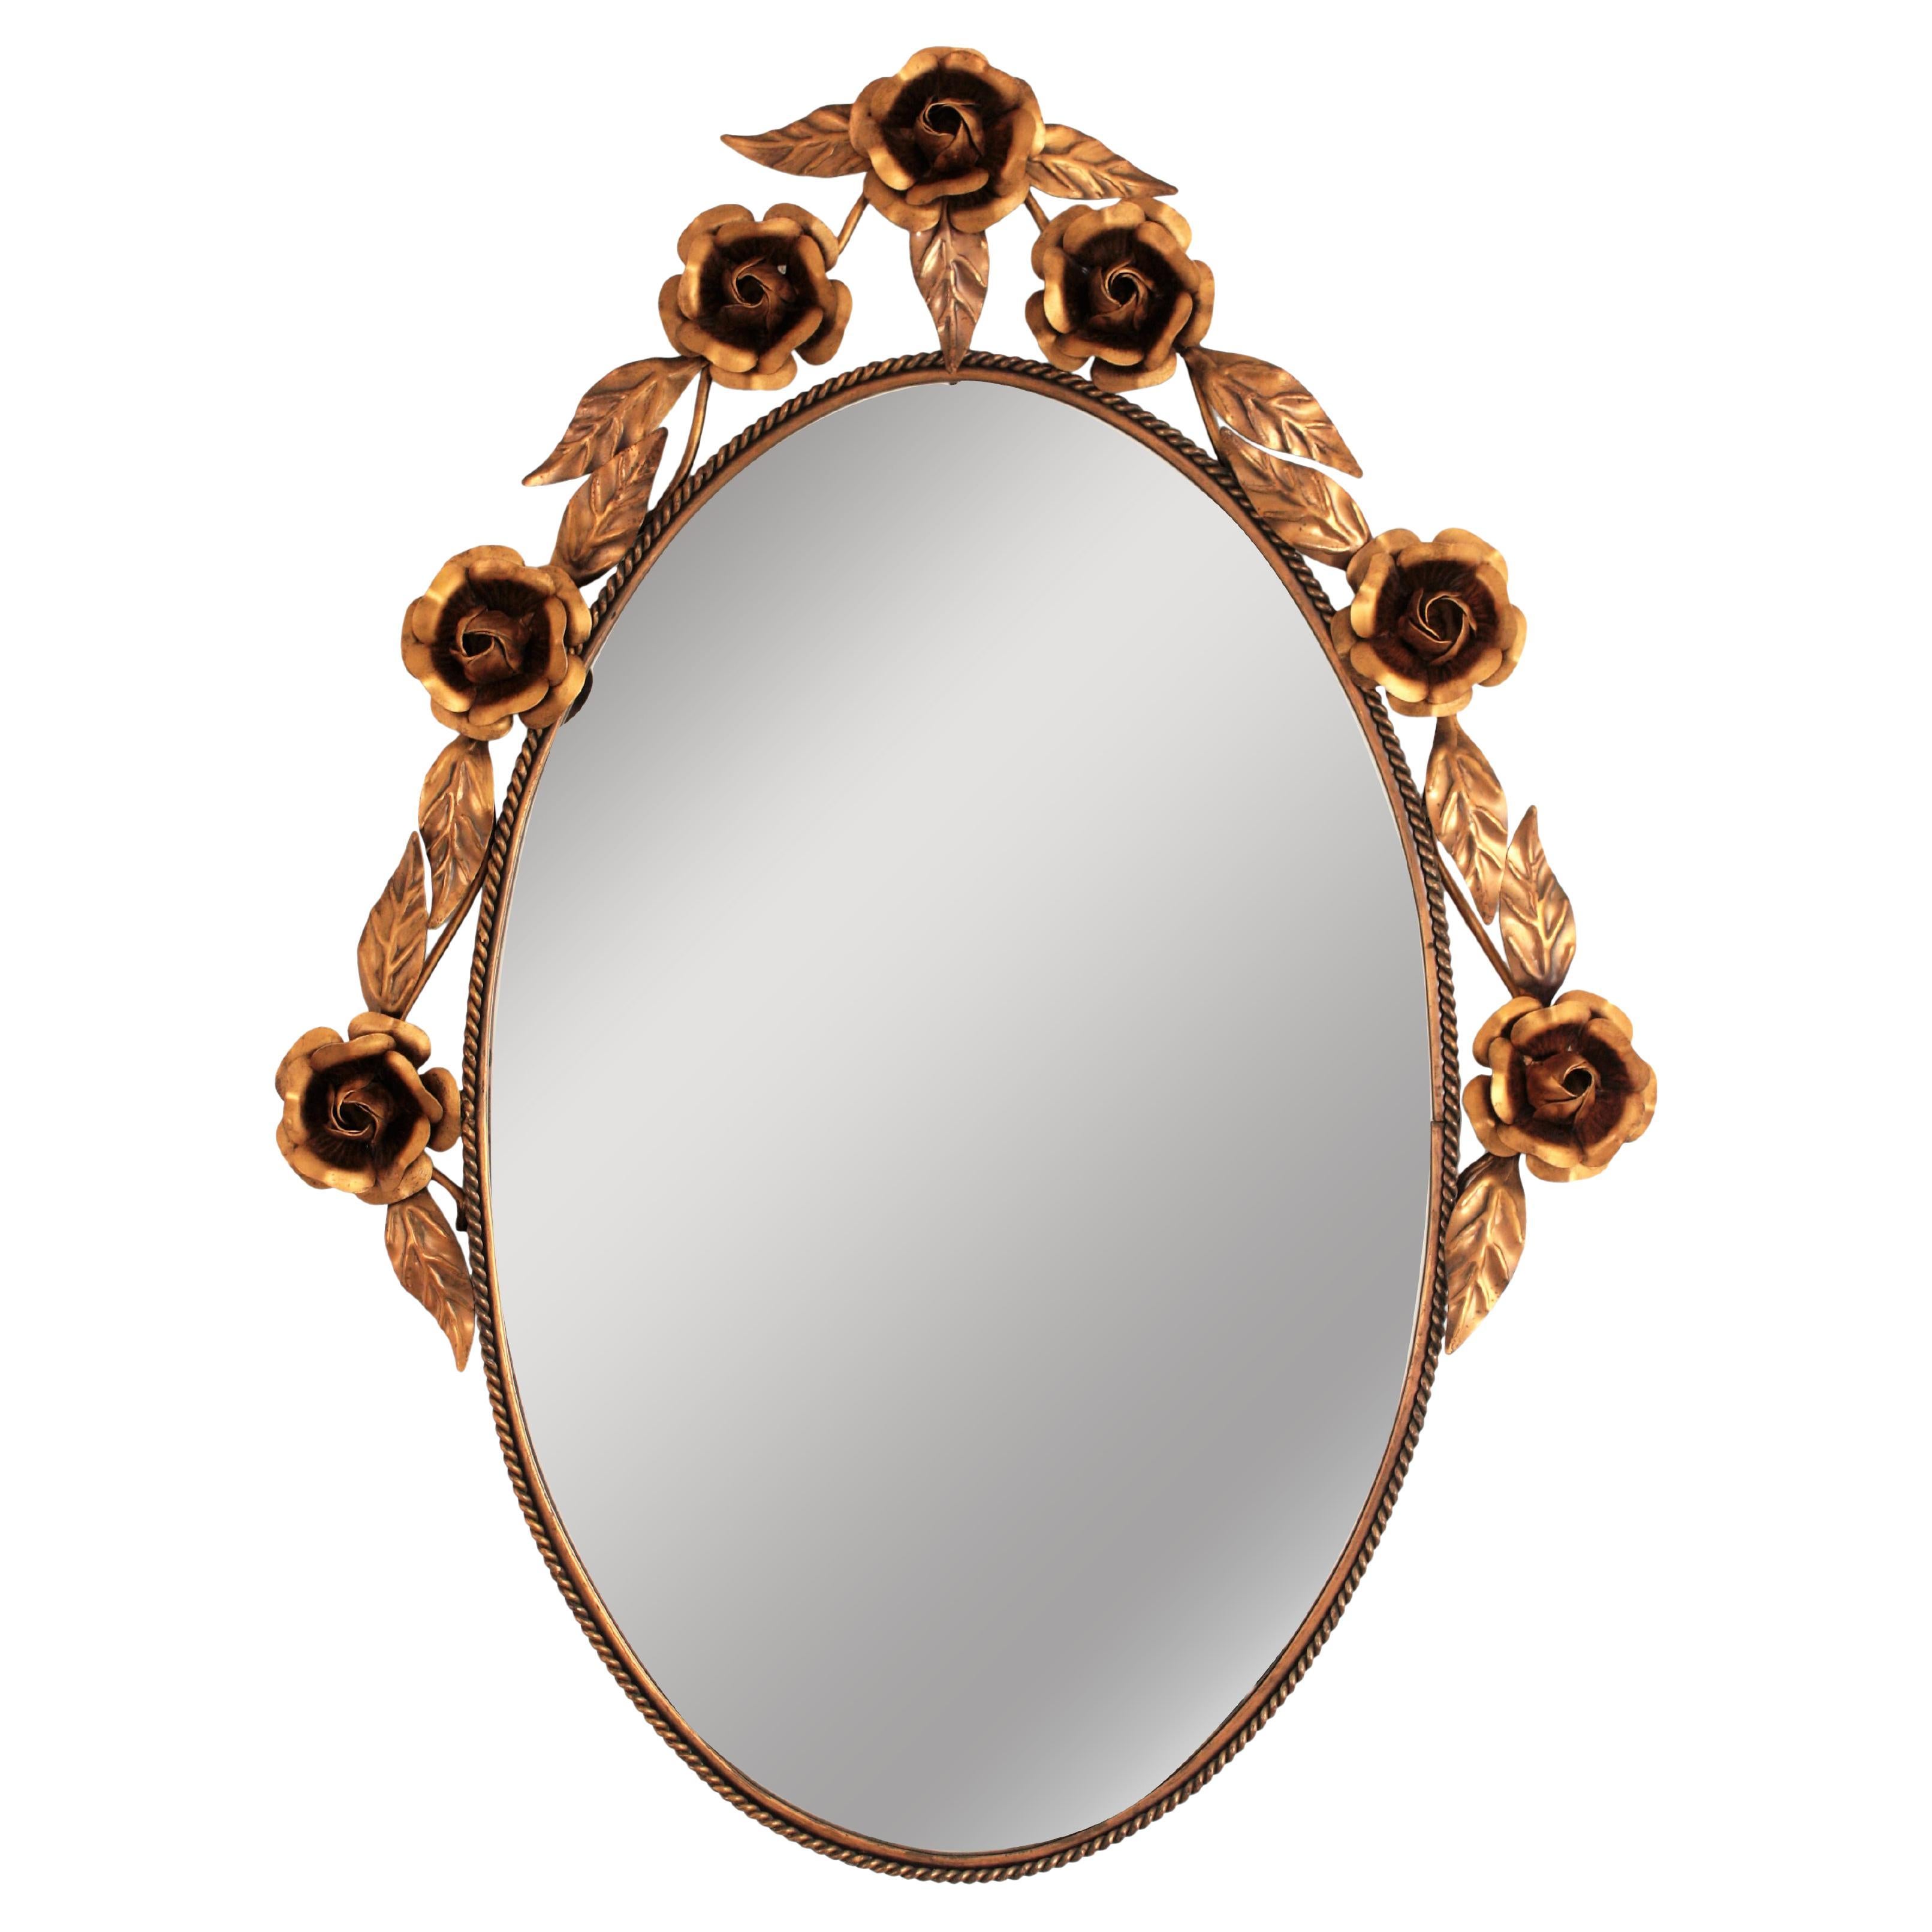 Oval Floral Wall Mirror in Copper, 1960s